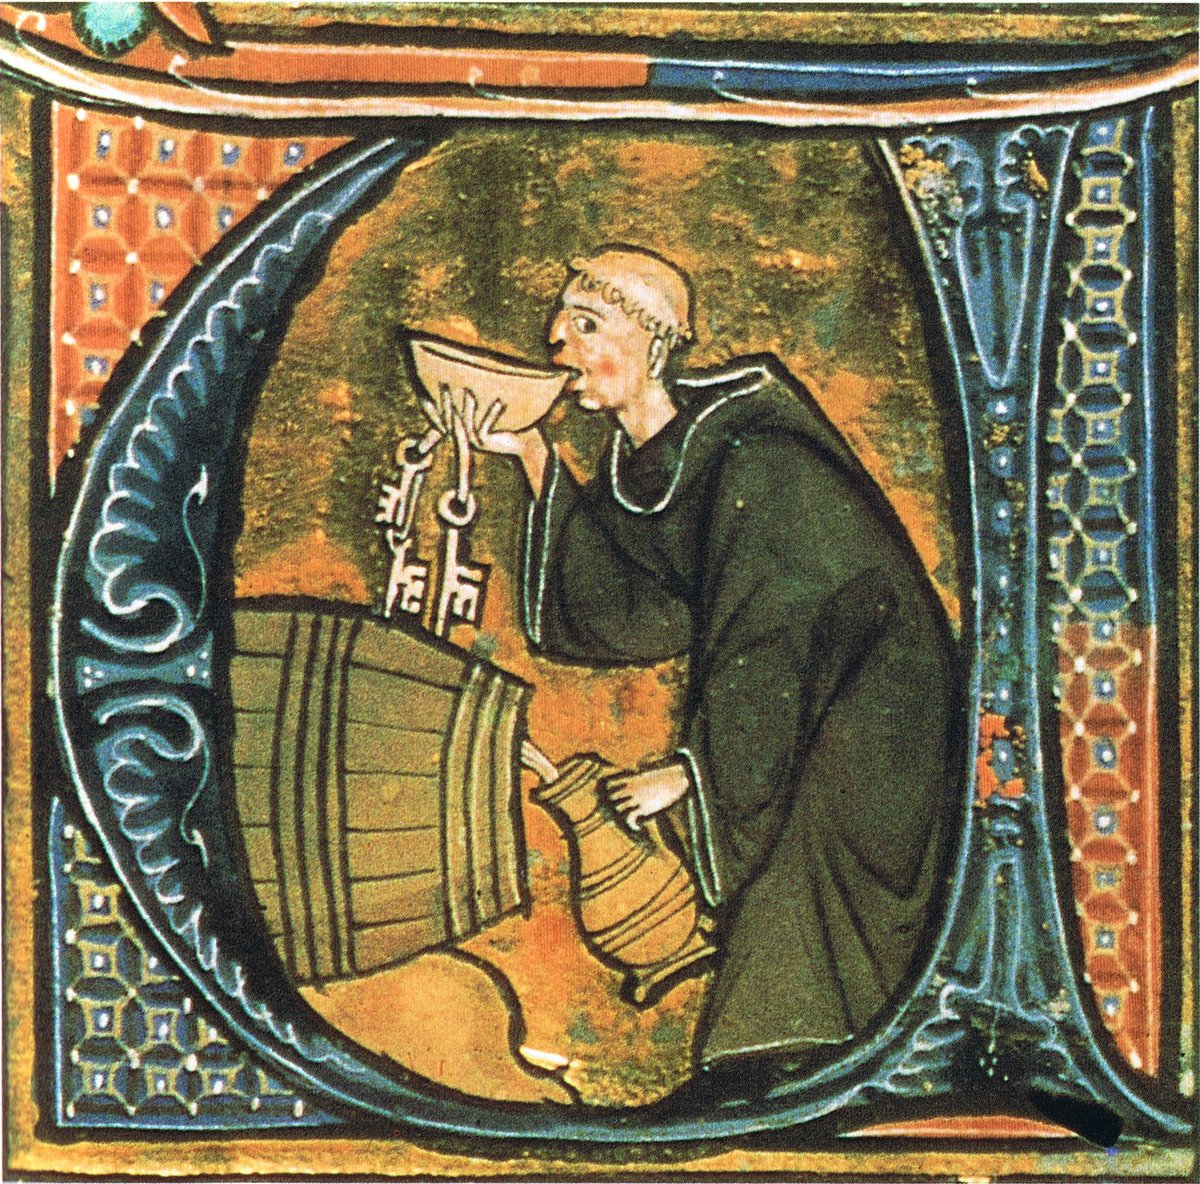 'As he brews, so shall he drink.'
-- Ben Jonson

#quotes #quotesoftheday #quoteoftheday #quote #LiteraturePosts #book #books #literary #art #literature #poetry #poetrylovers #BenJonson #brewery #medieval #medievaltwitter #England #Literature #drama #English #MiddleAges #drink